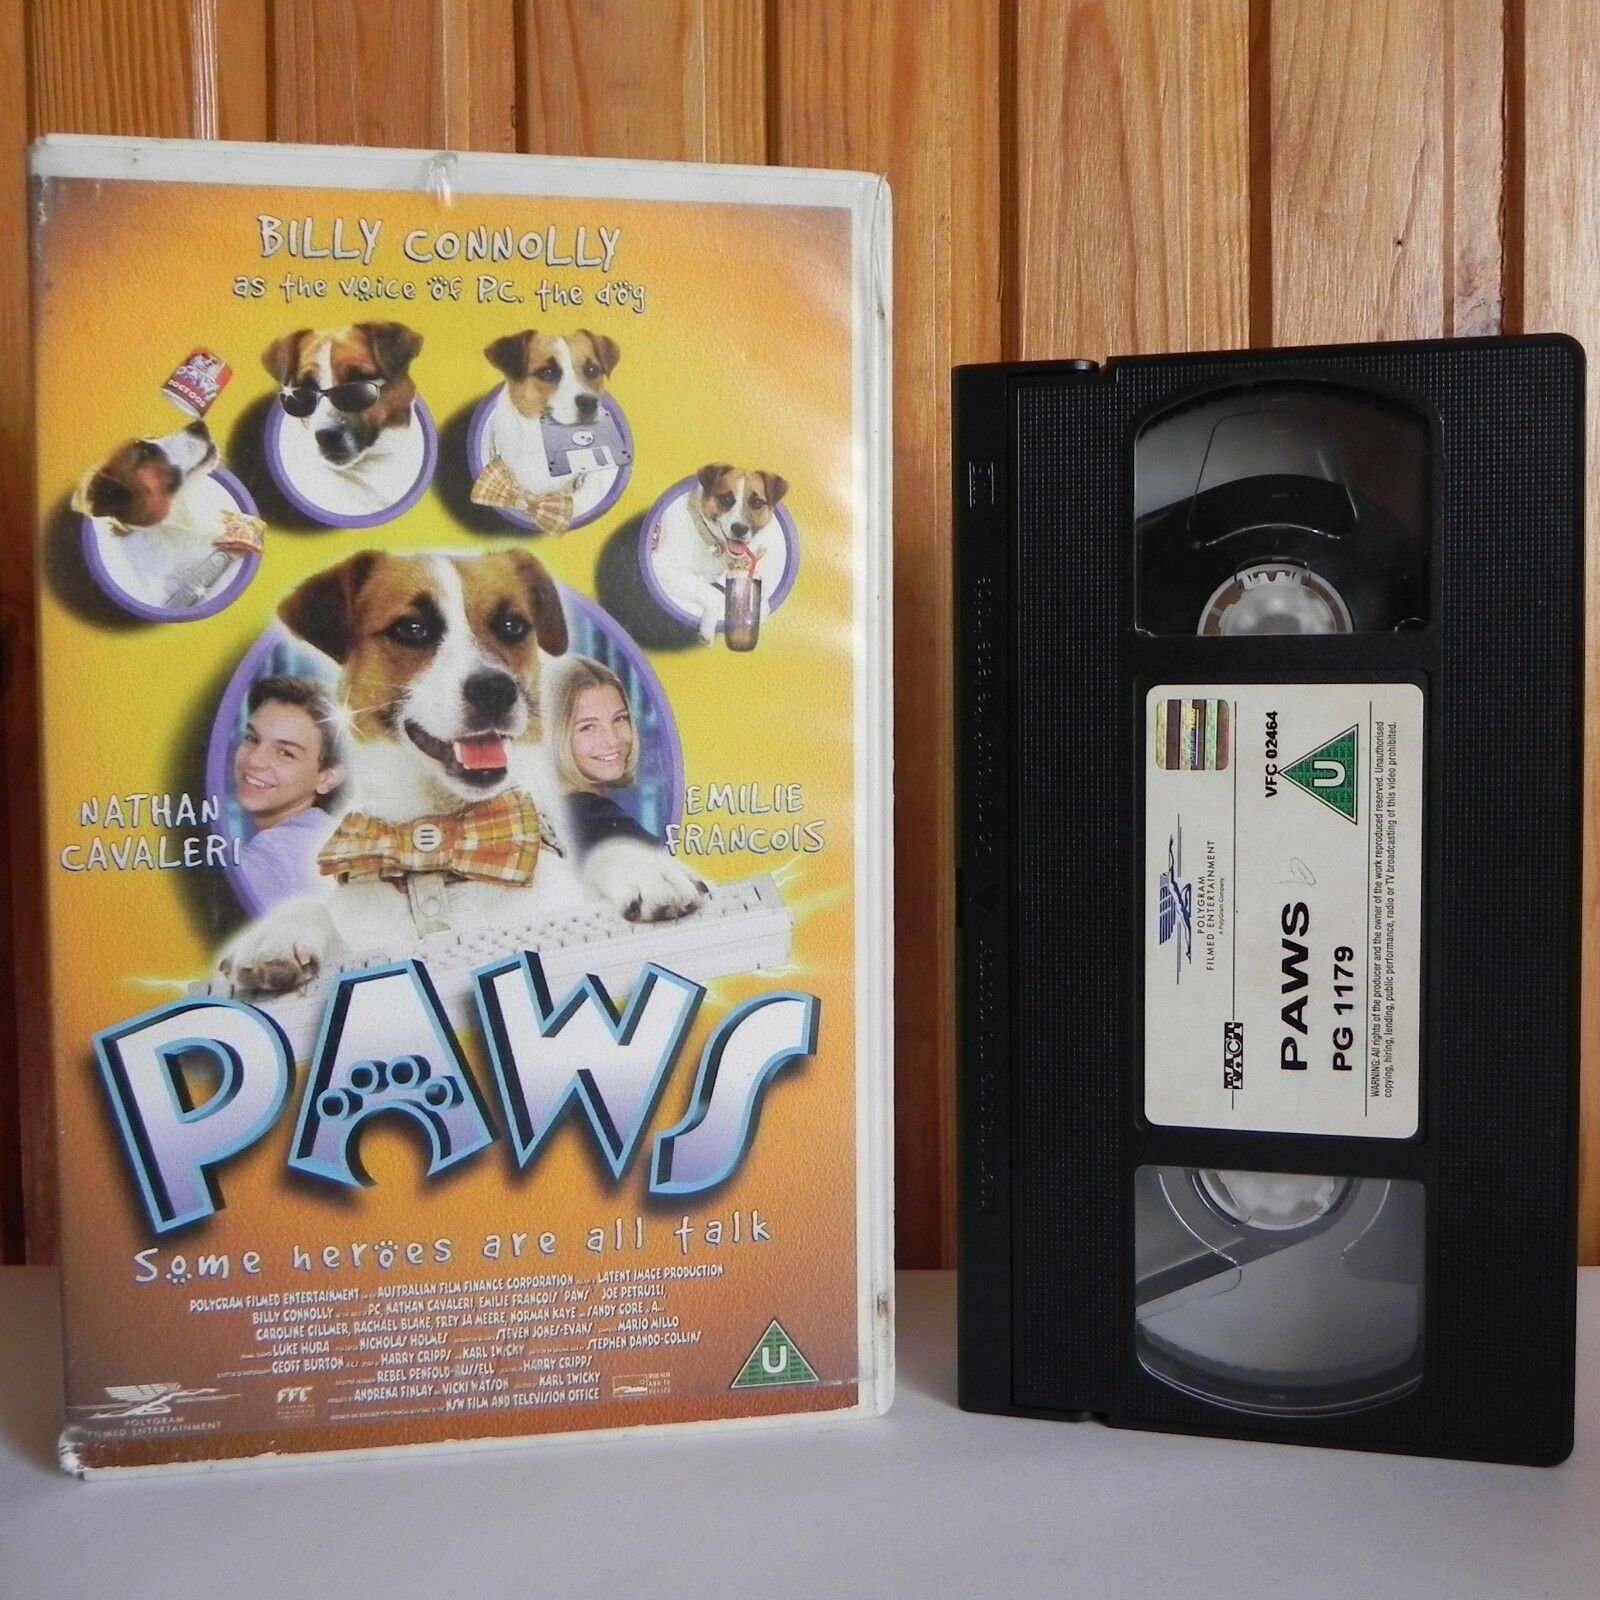 Paws - PolyGram - Family - Ex-rental - Billy Connolly - Large Box - Pal VHS-